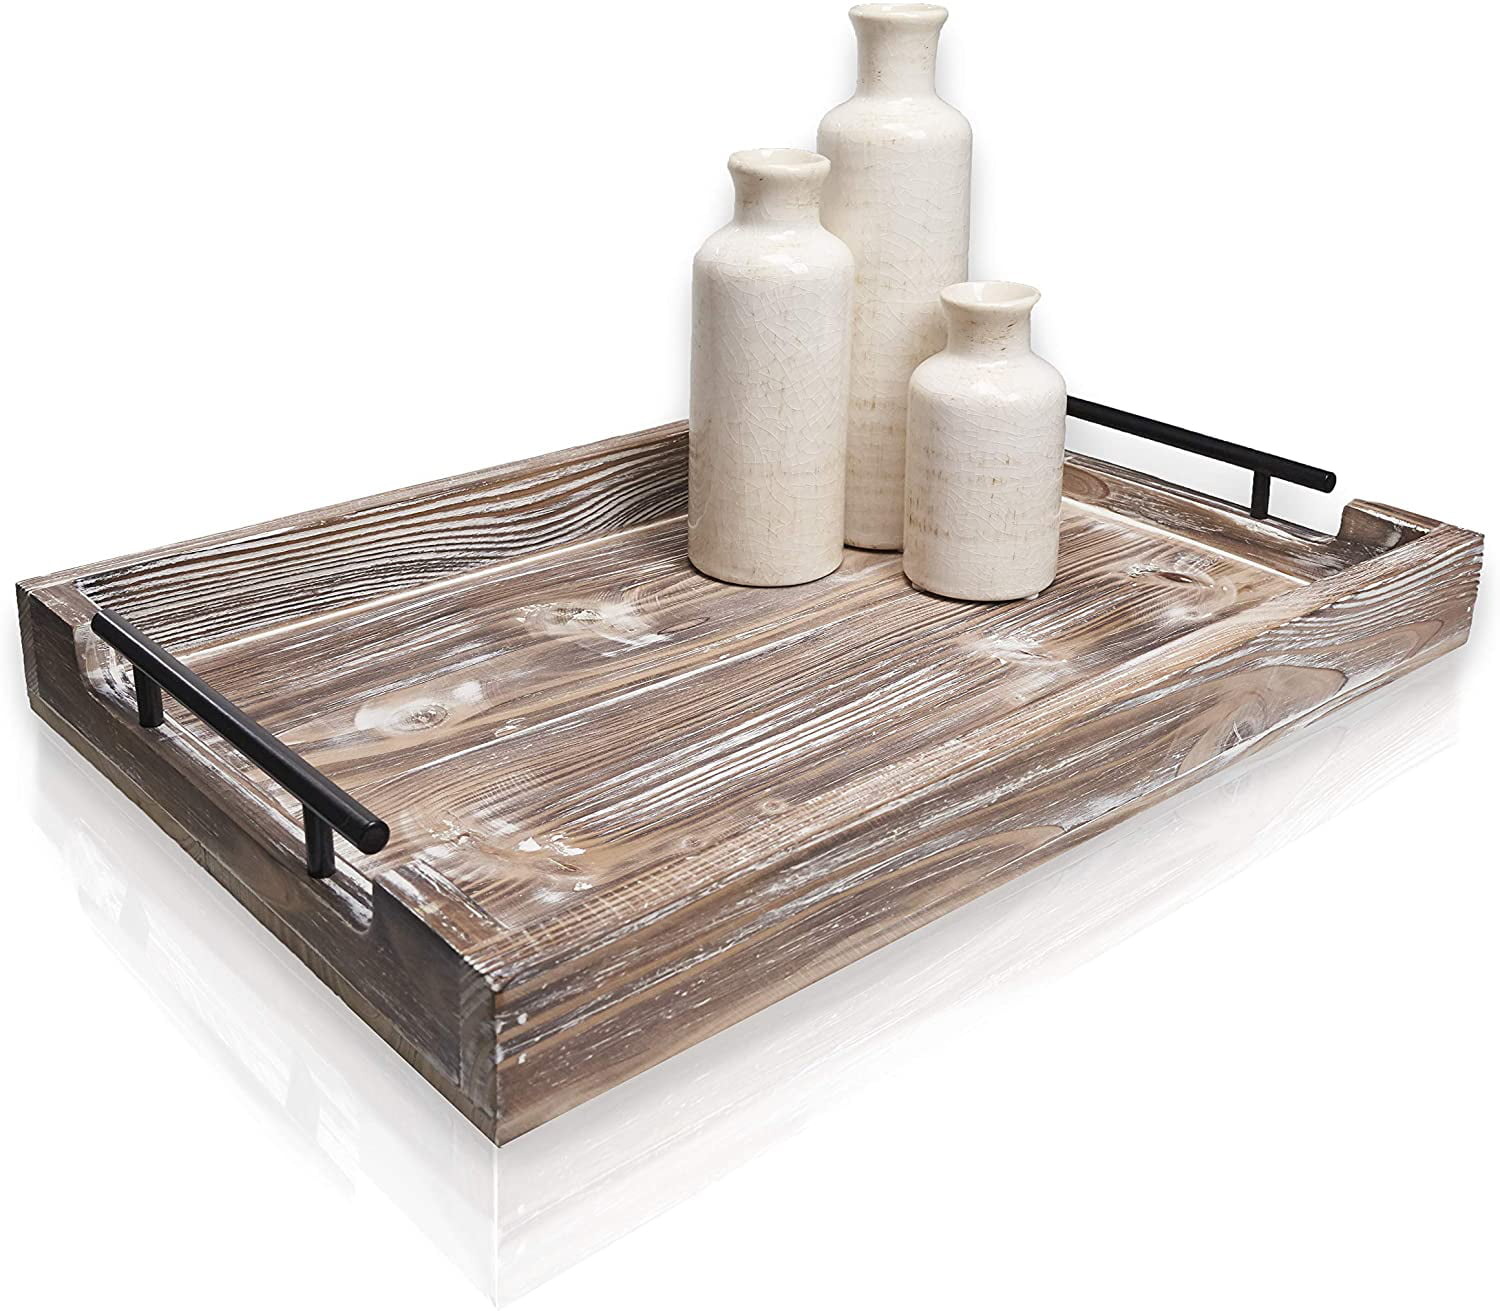 White Decorative Large Rustic Wooden Tray 19.5” Great for Kitchen Black Sleek Metal Handles Breakfast in Bed Farmhouse Home Décor Bathtub Accessory Dinning Centerpiece Wine Serving Coffee 